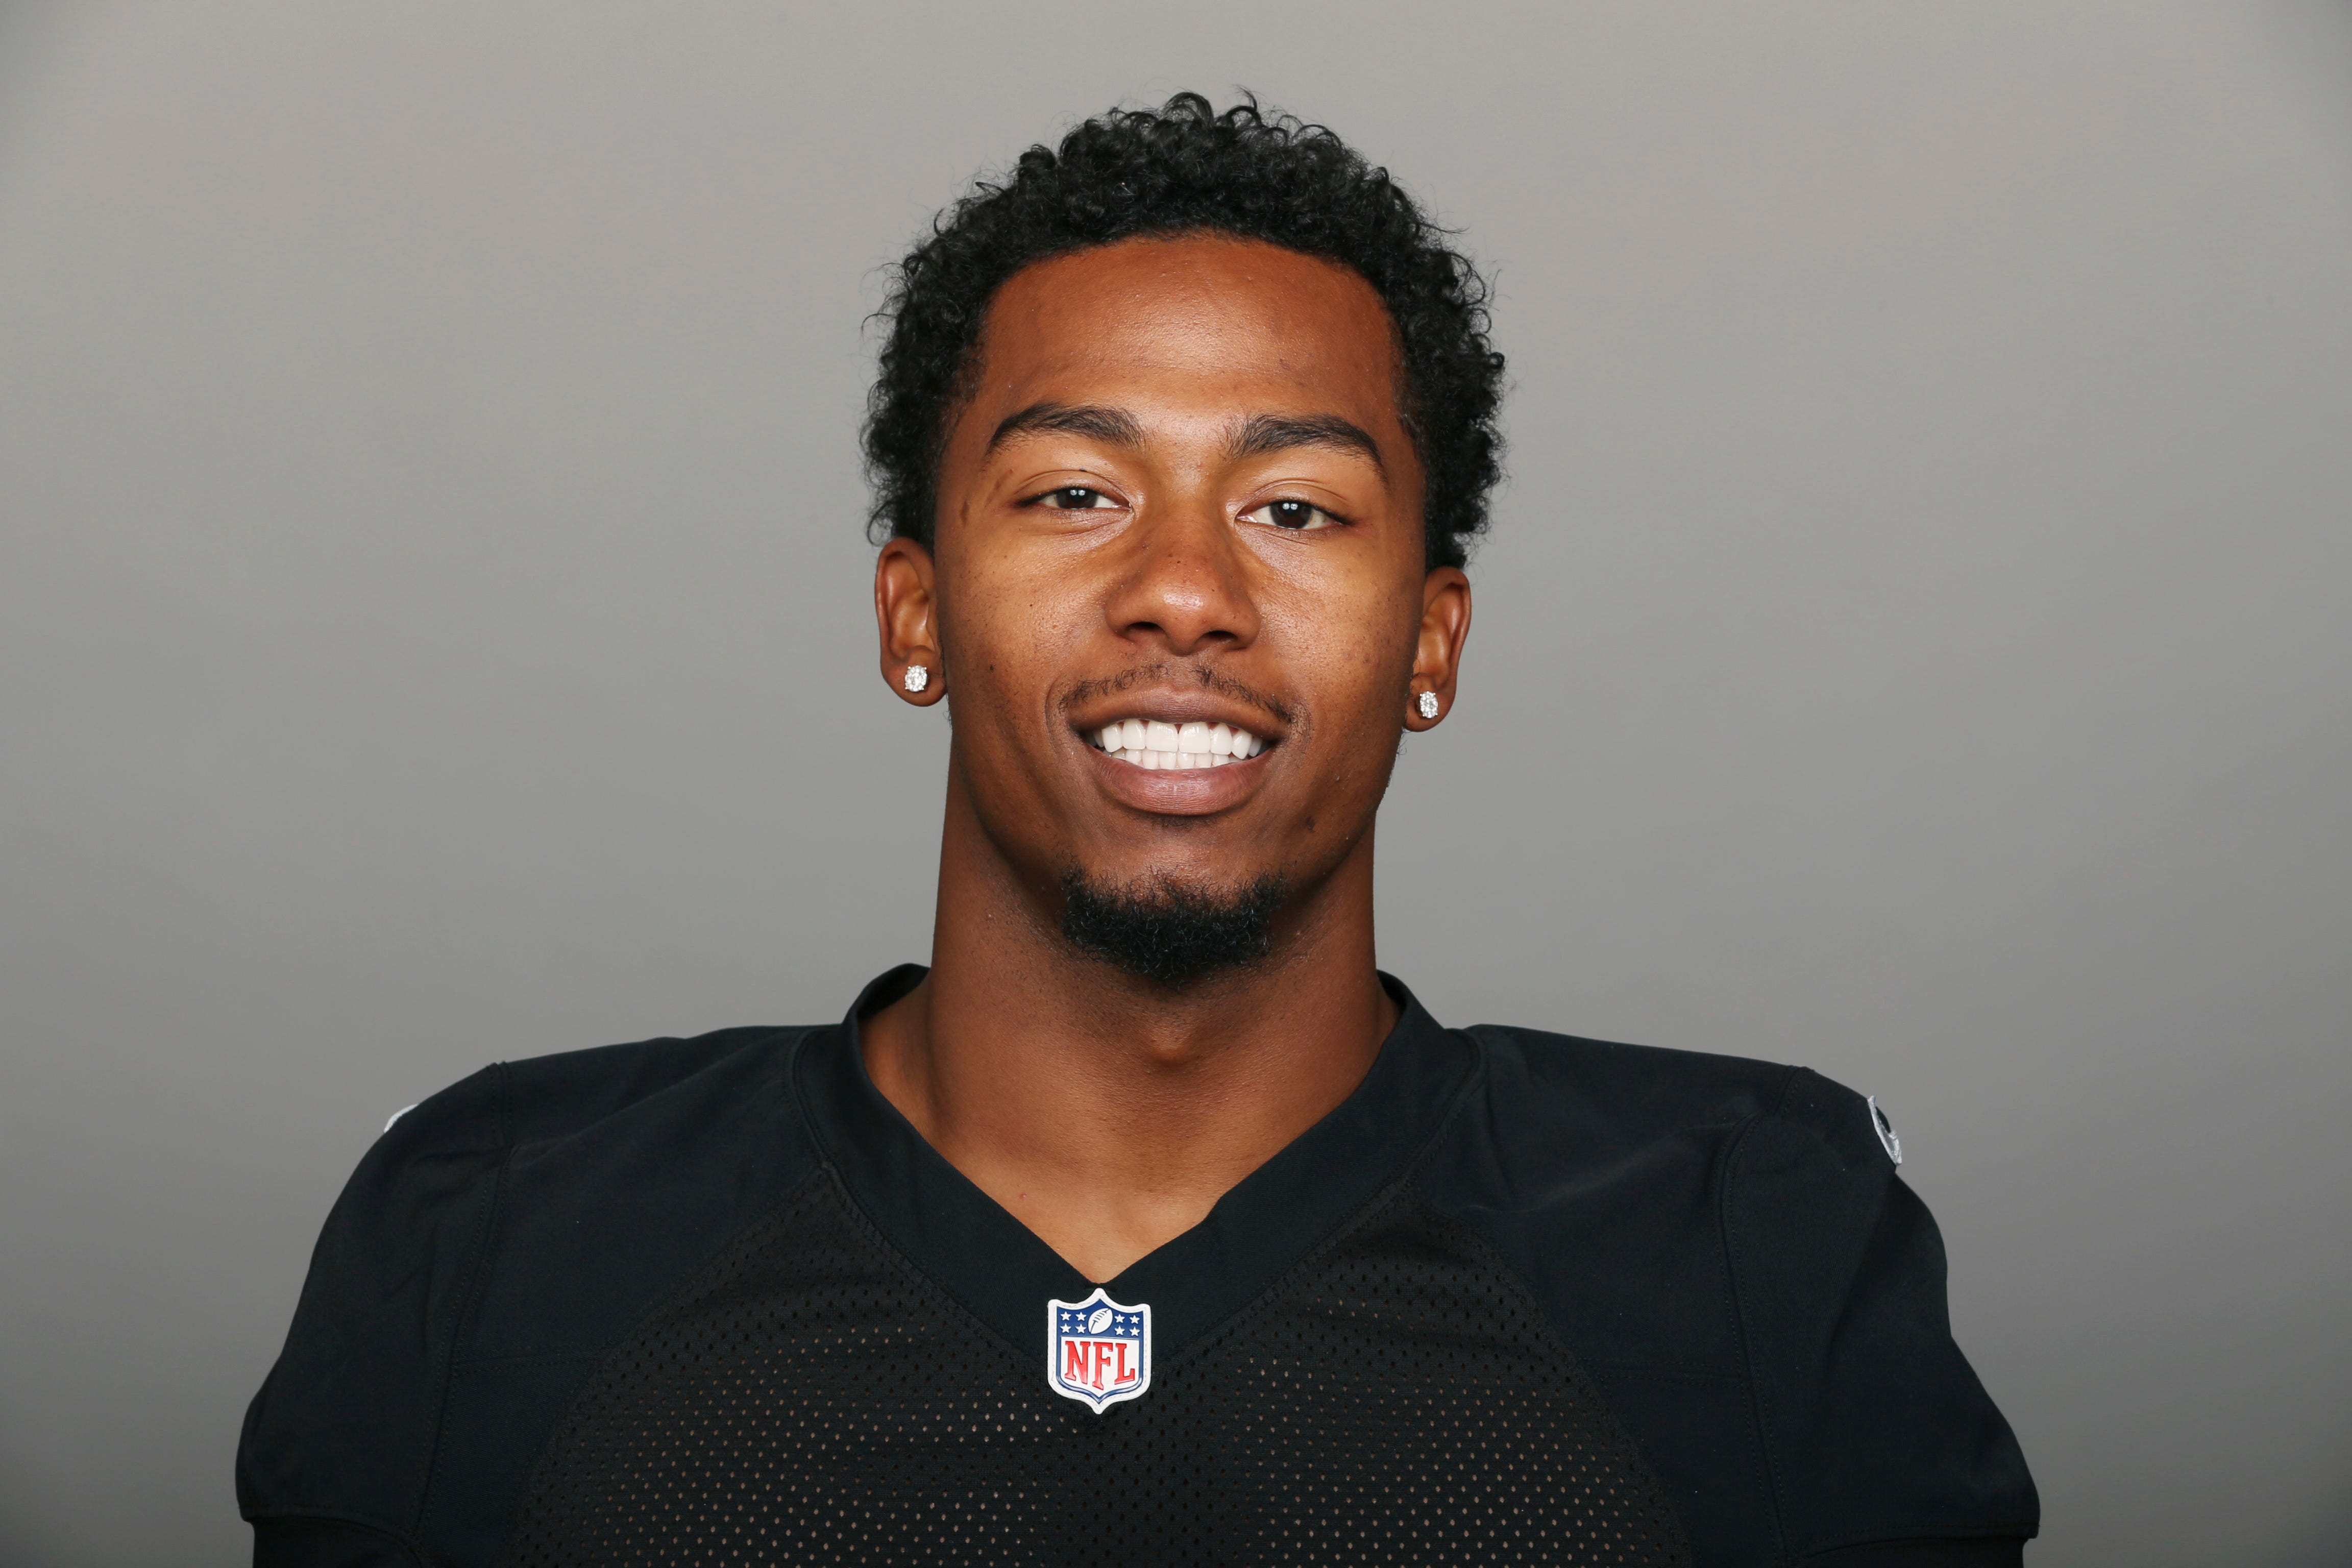 Raiders release CB Sean Smith, RT Marshall Newhouse